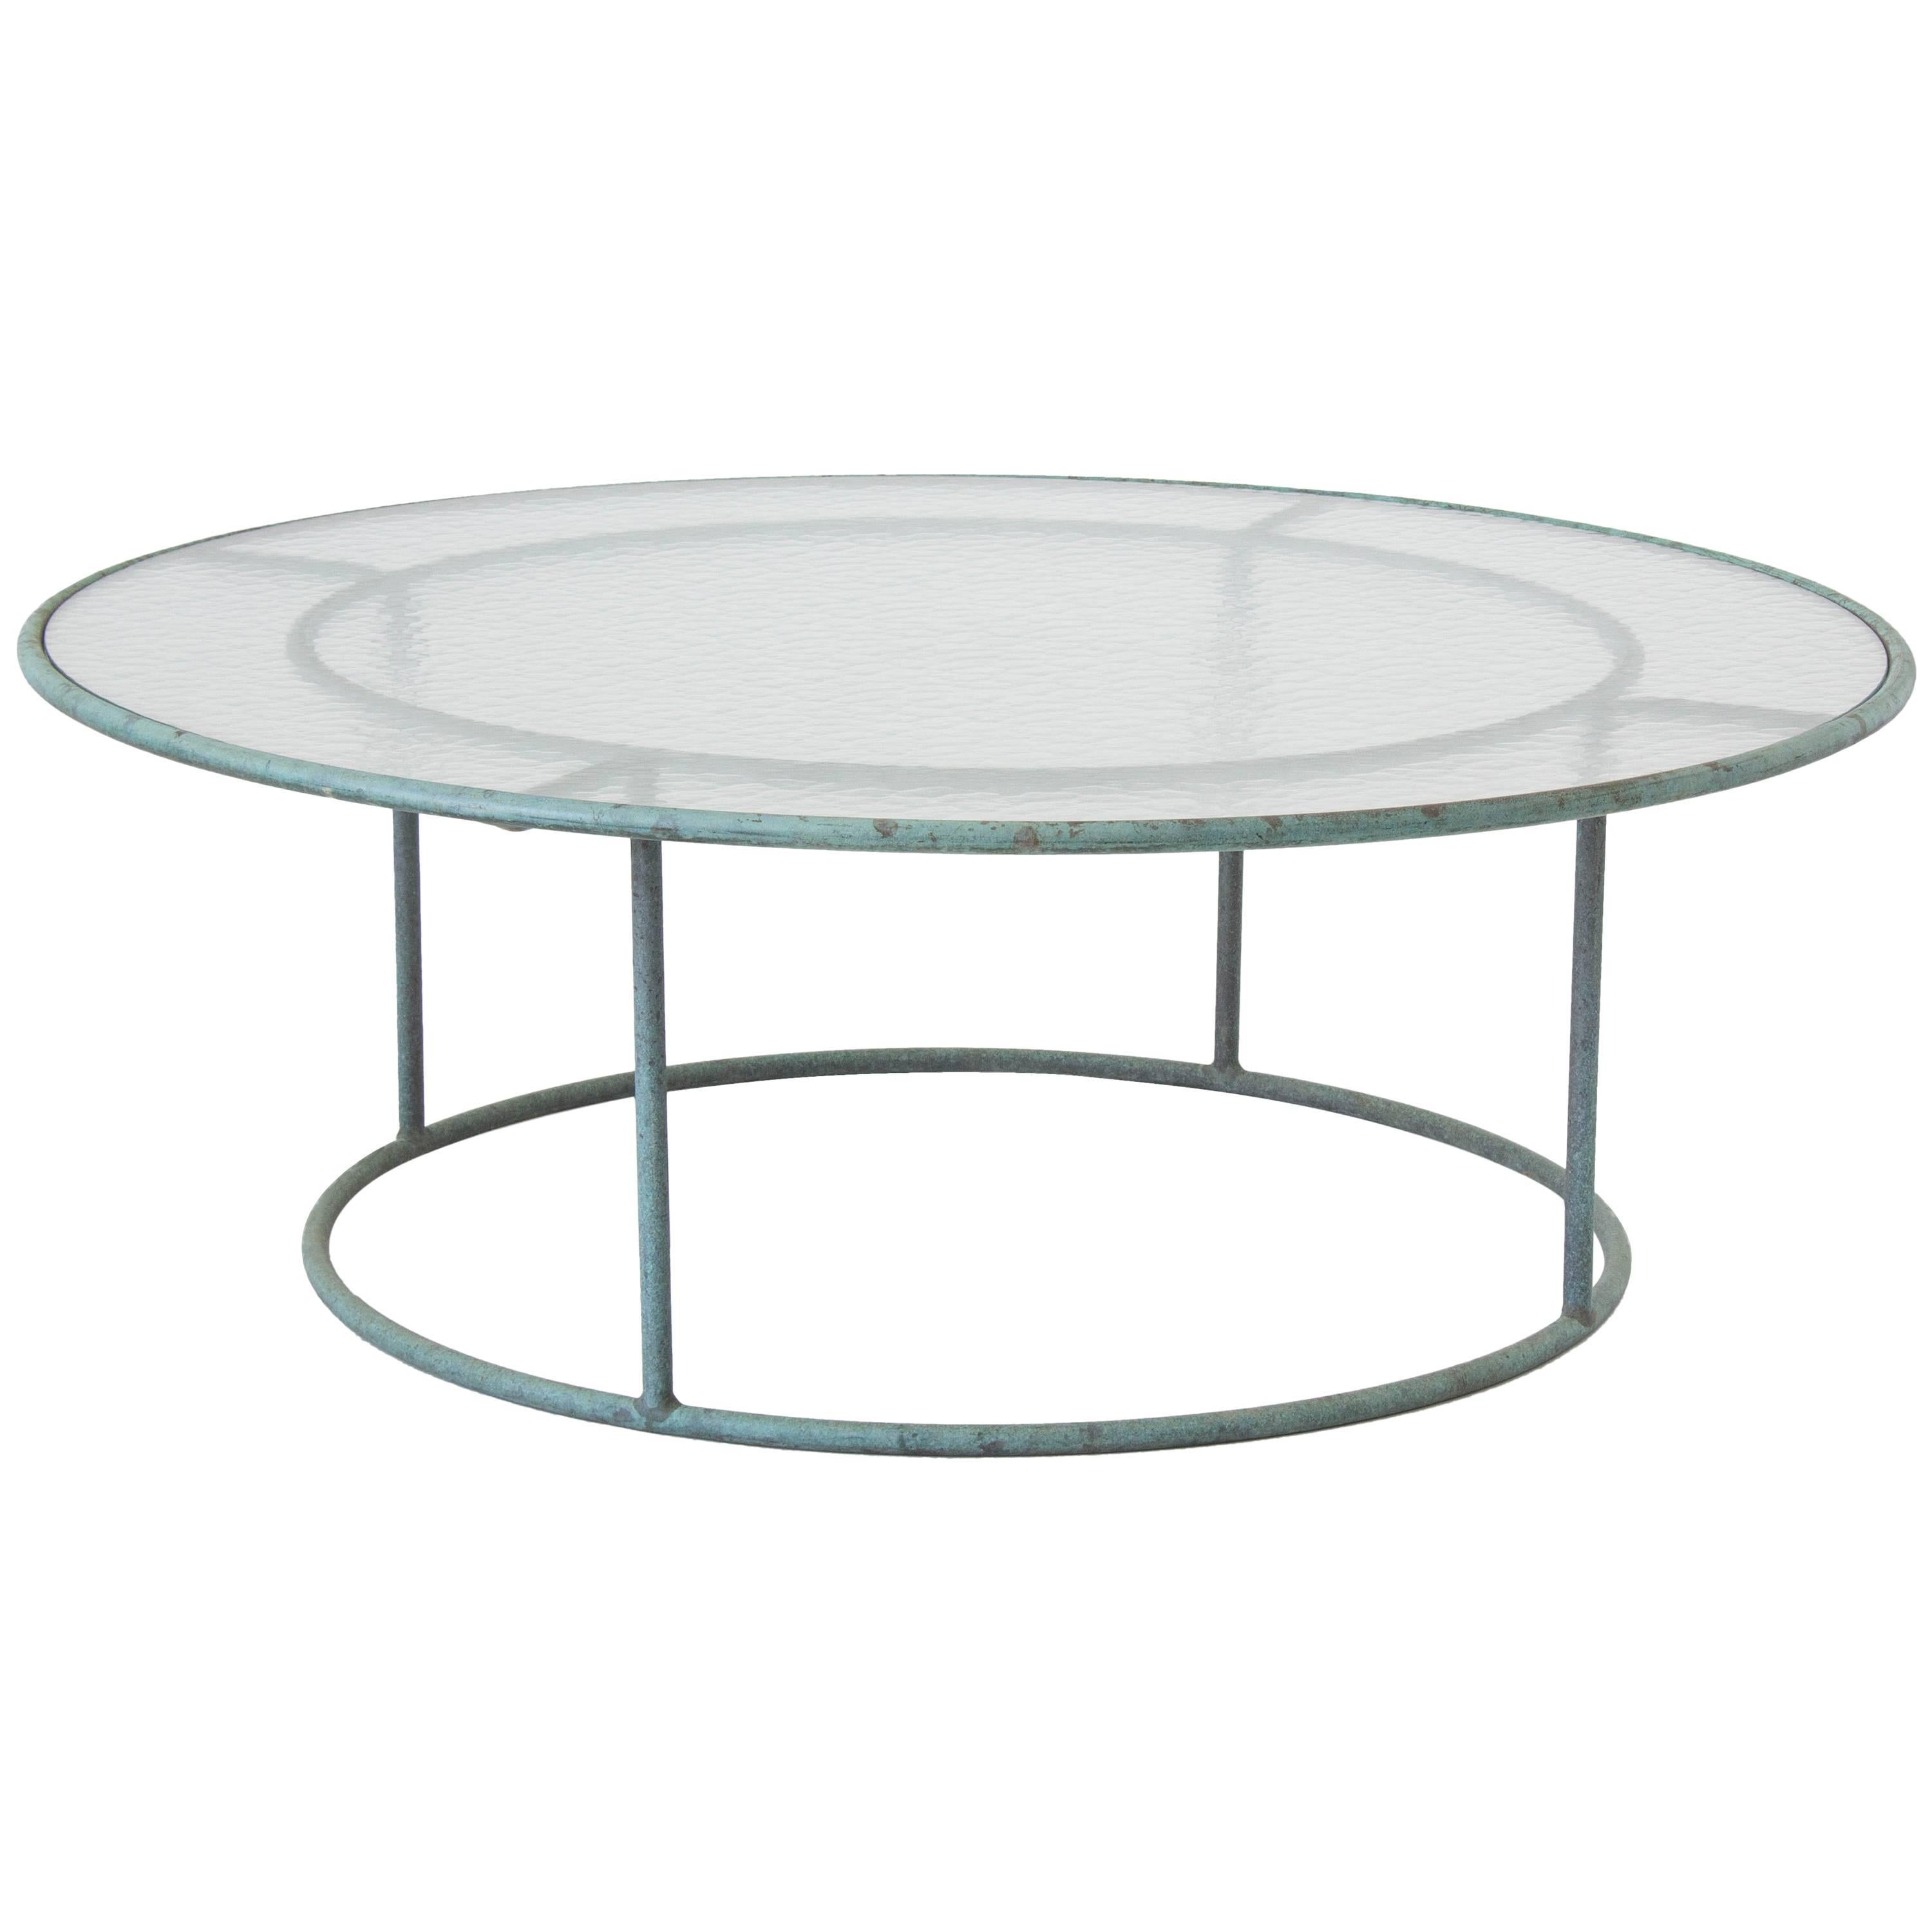 Walter Lamb Round Coffee Table with Hammered Glass Top